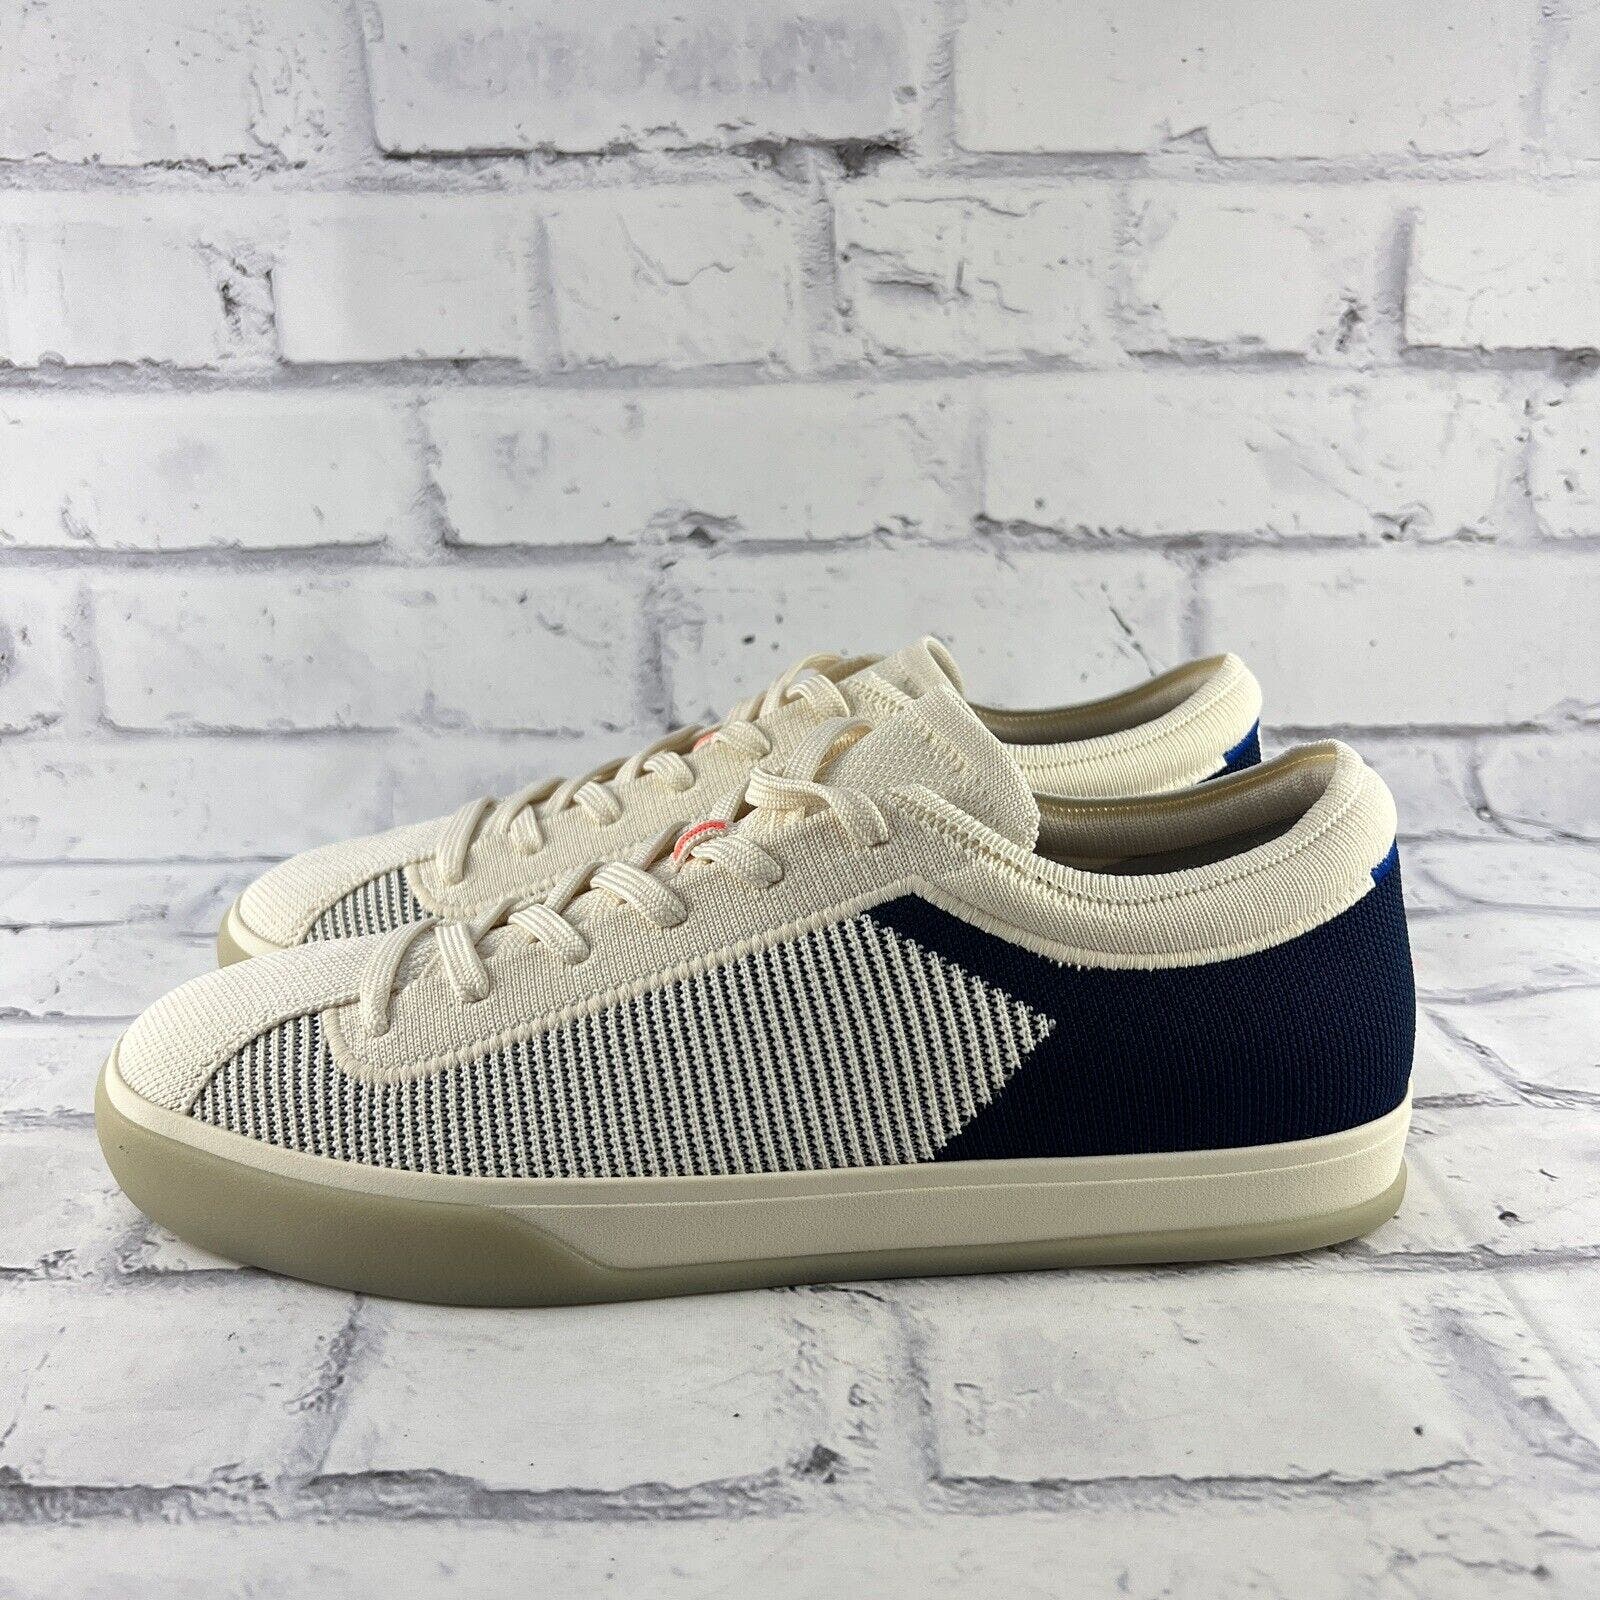 ROTHY'S The Lace Up Knit Fabric Sneakers Casual Shoes Womens Sz 11 Cream/Navy